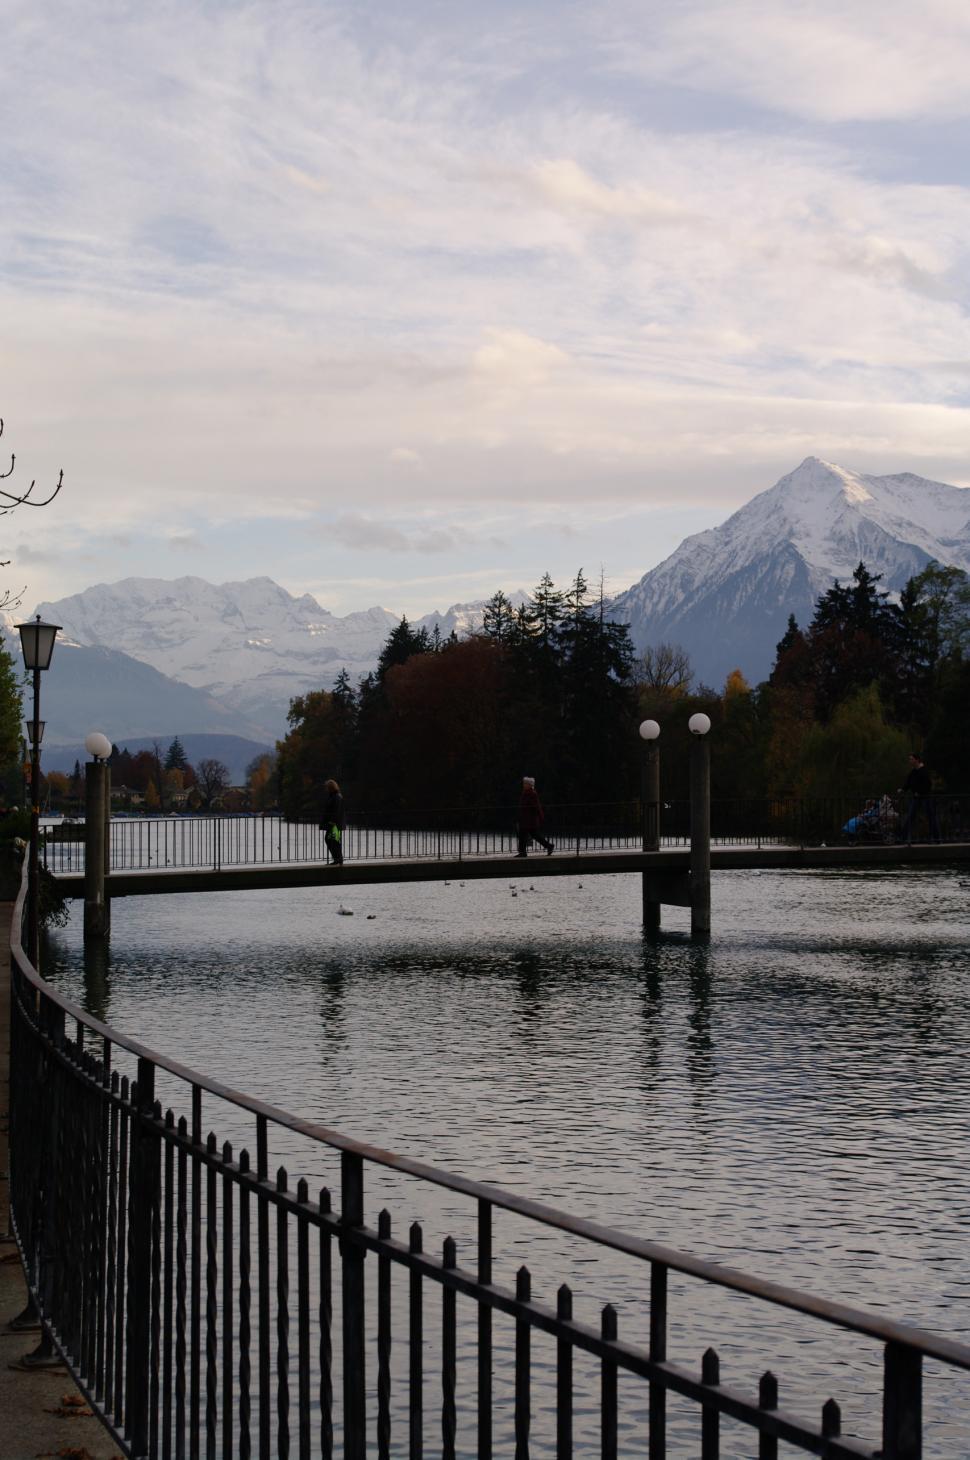 Free Image of Bridge Crossing Over Water With Mountains in Background 